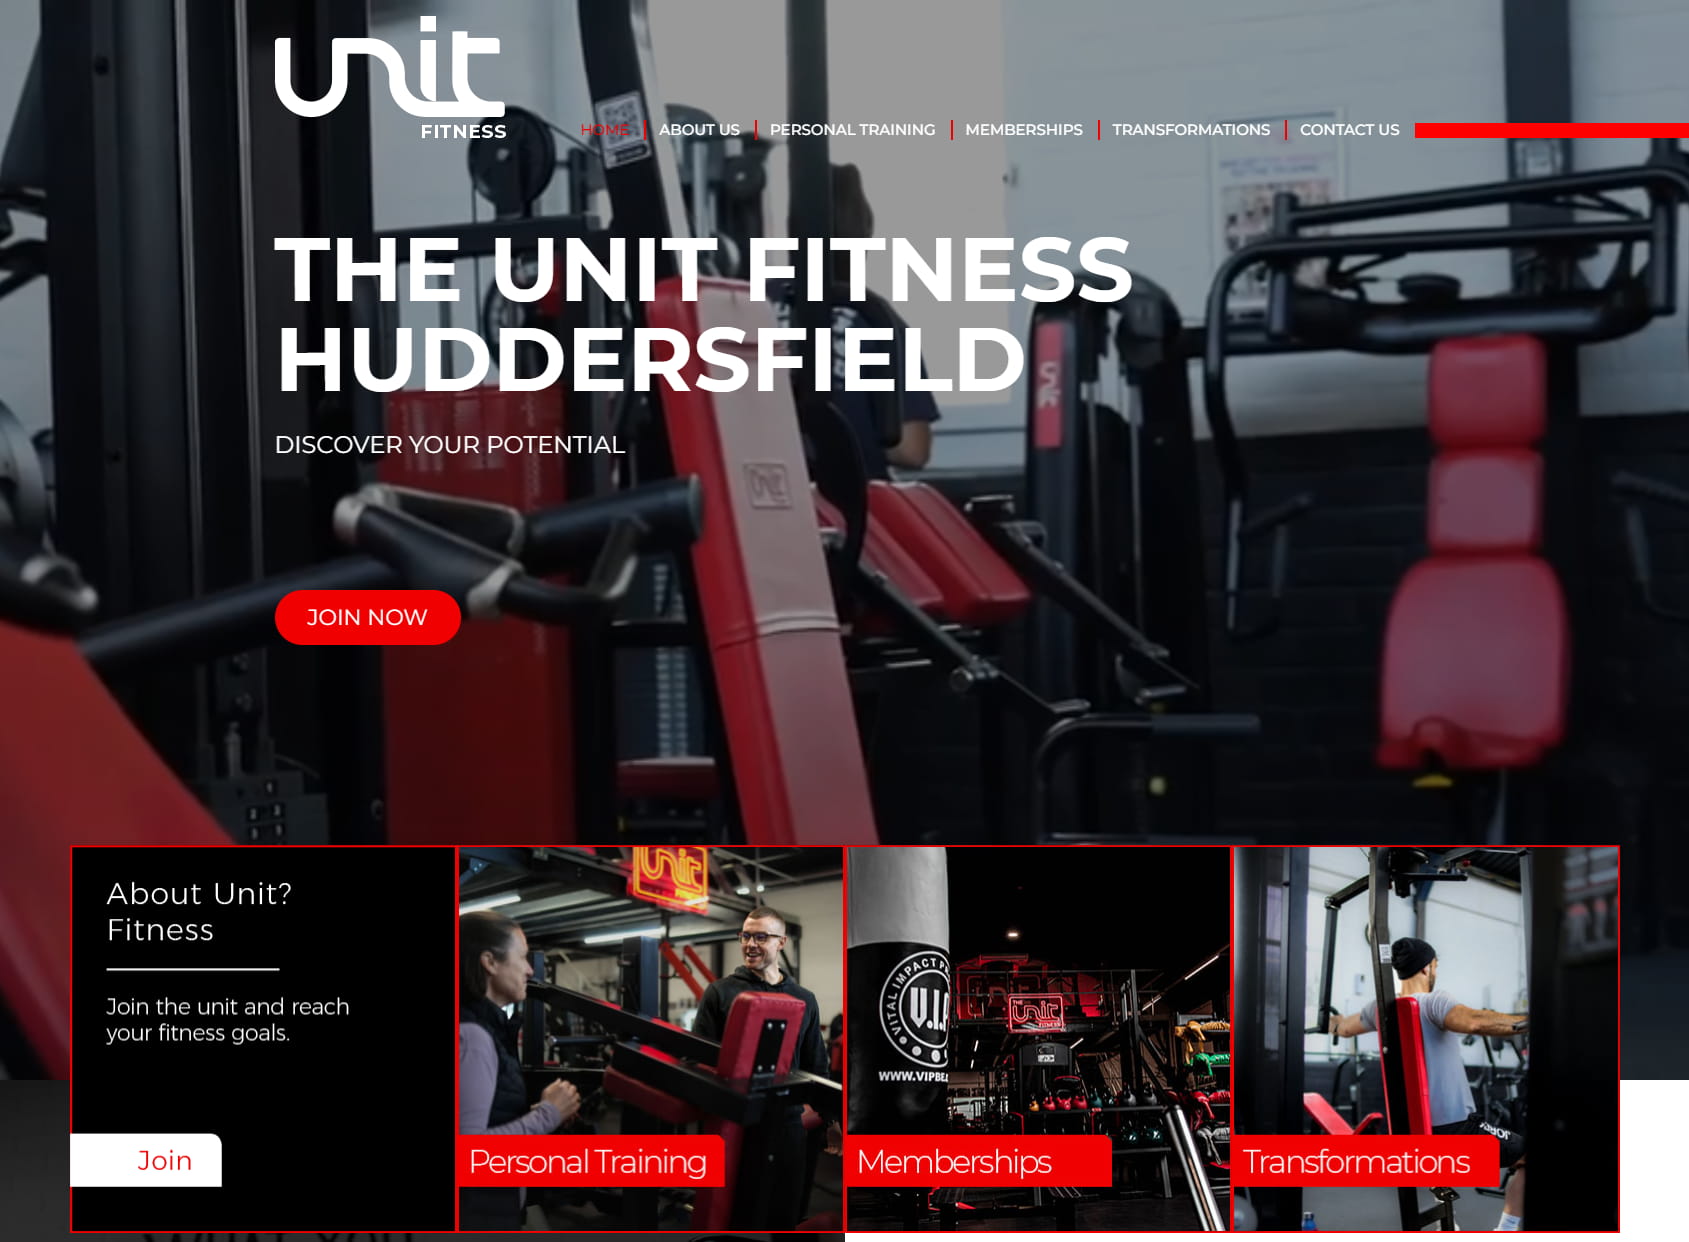 The Unit Fitness